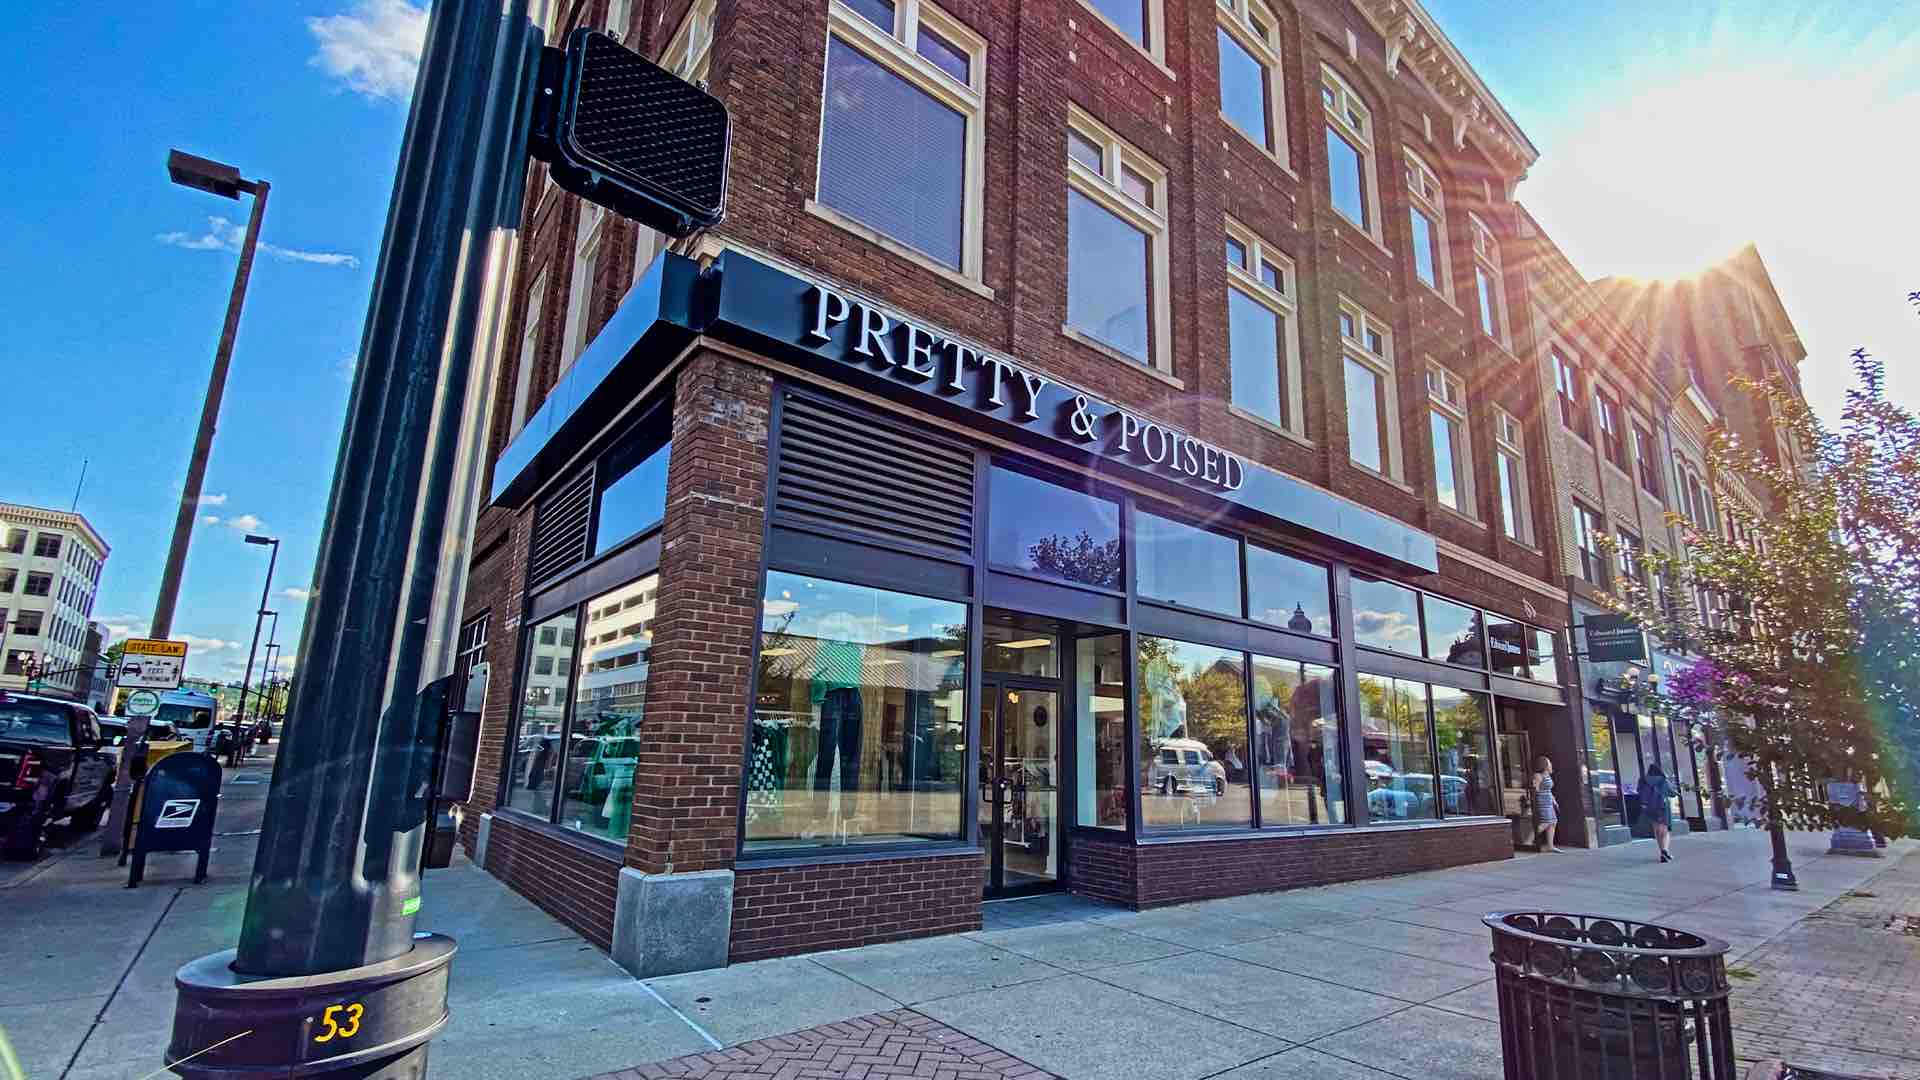 Pretty And Poised Comes To Downtown Huntington